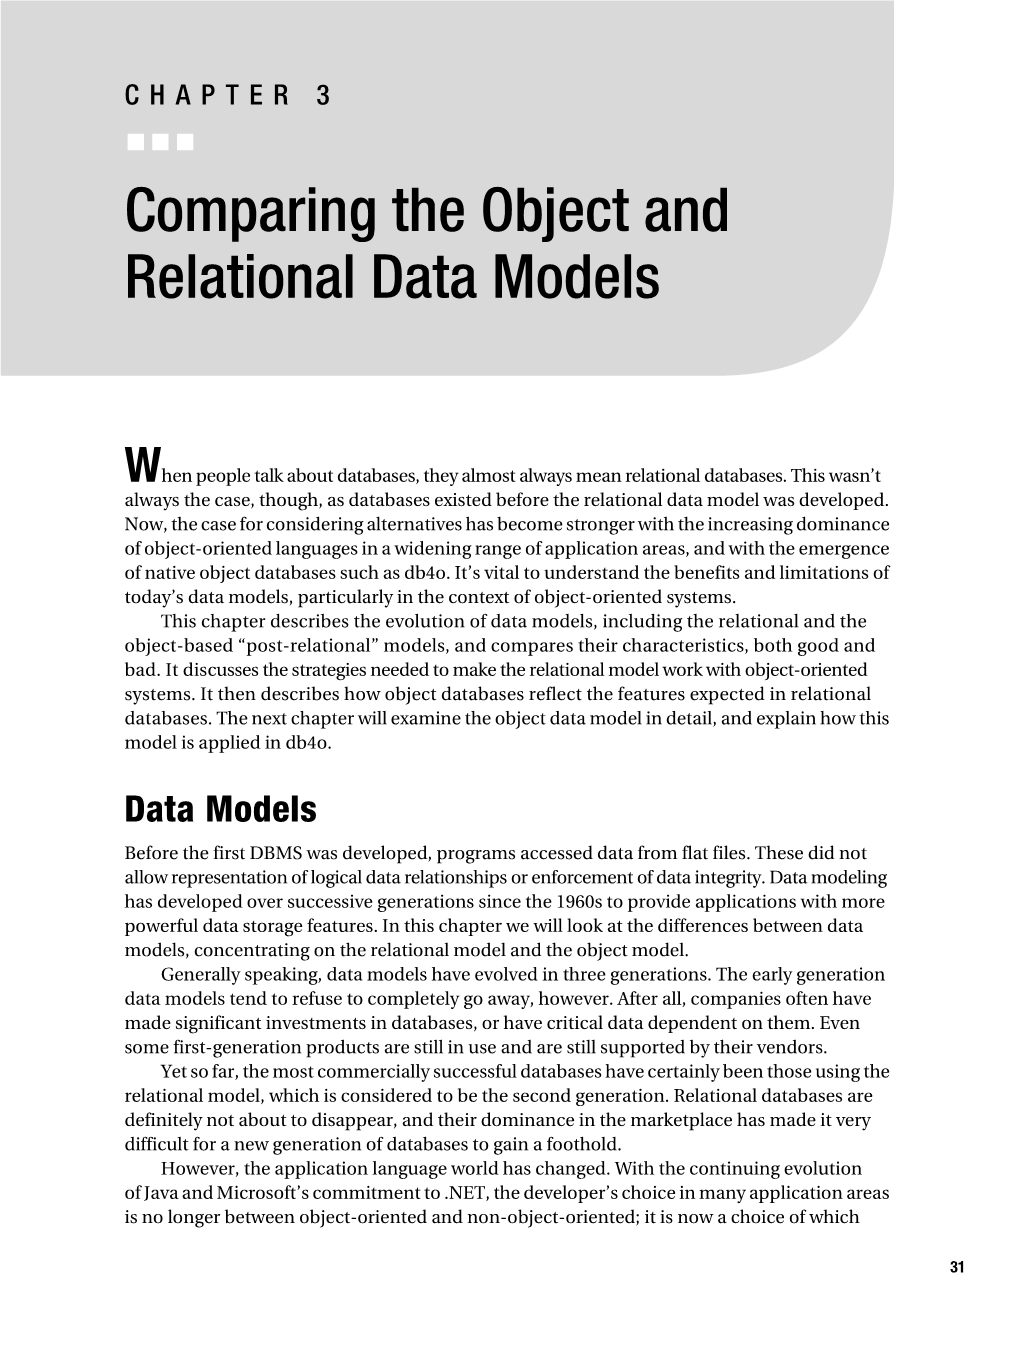 002.02 Comparing the Object and the Relational Data Model